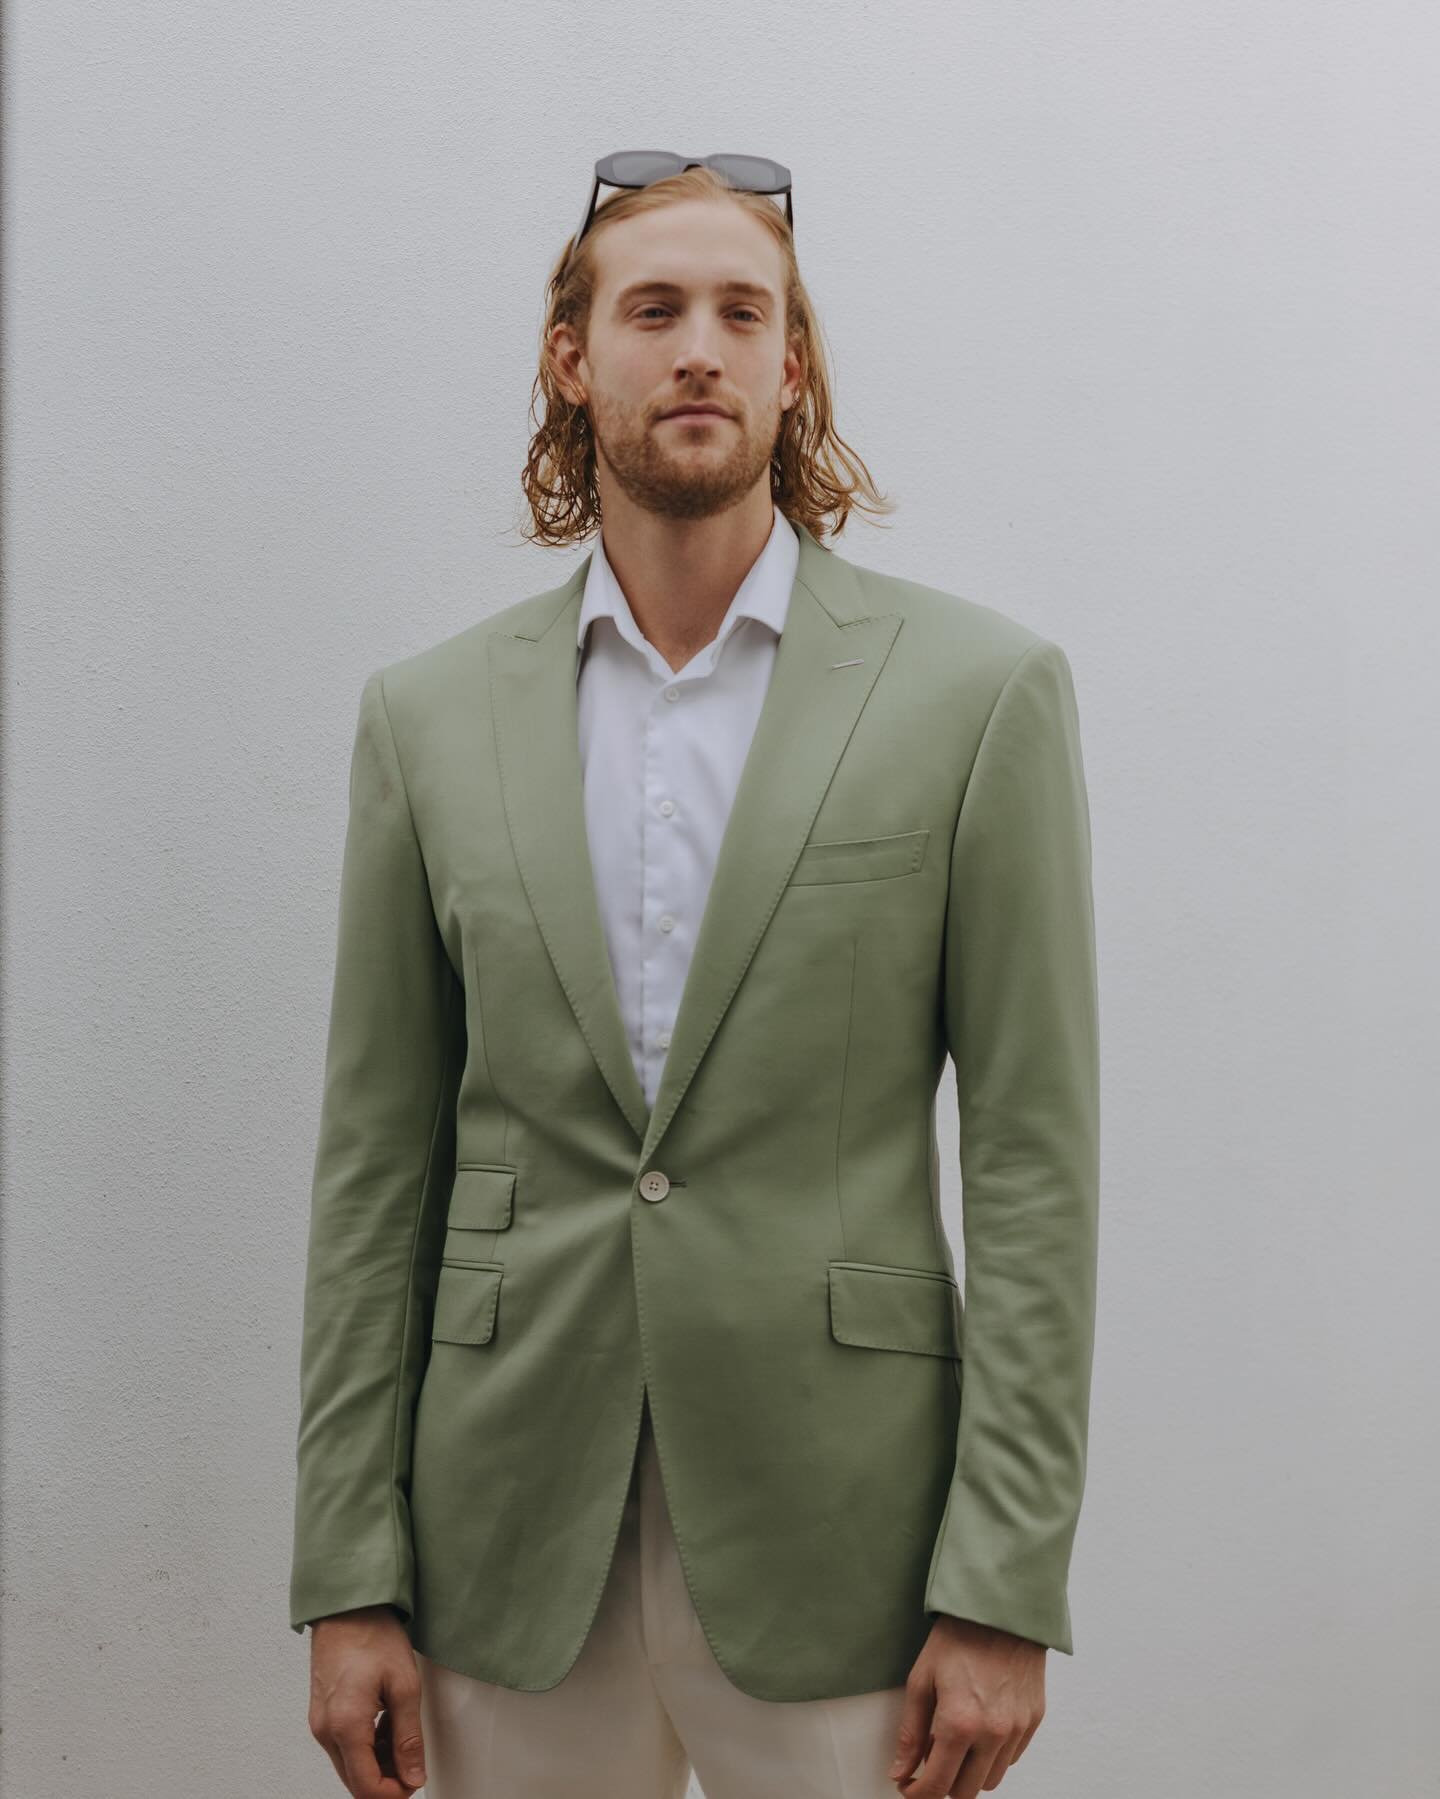 Custom Sage green Blazer for the spring

🪡 custom single button blazer
🪡 ticket pocket
🪡 last stitch buttonhole different color

This is the perfect Spring/Summer blazer for weddings, events, and can be worn with jeans for a more casual look
#dcta